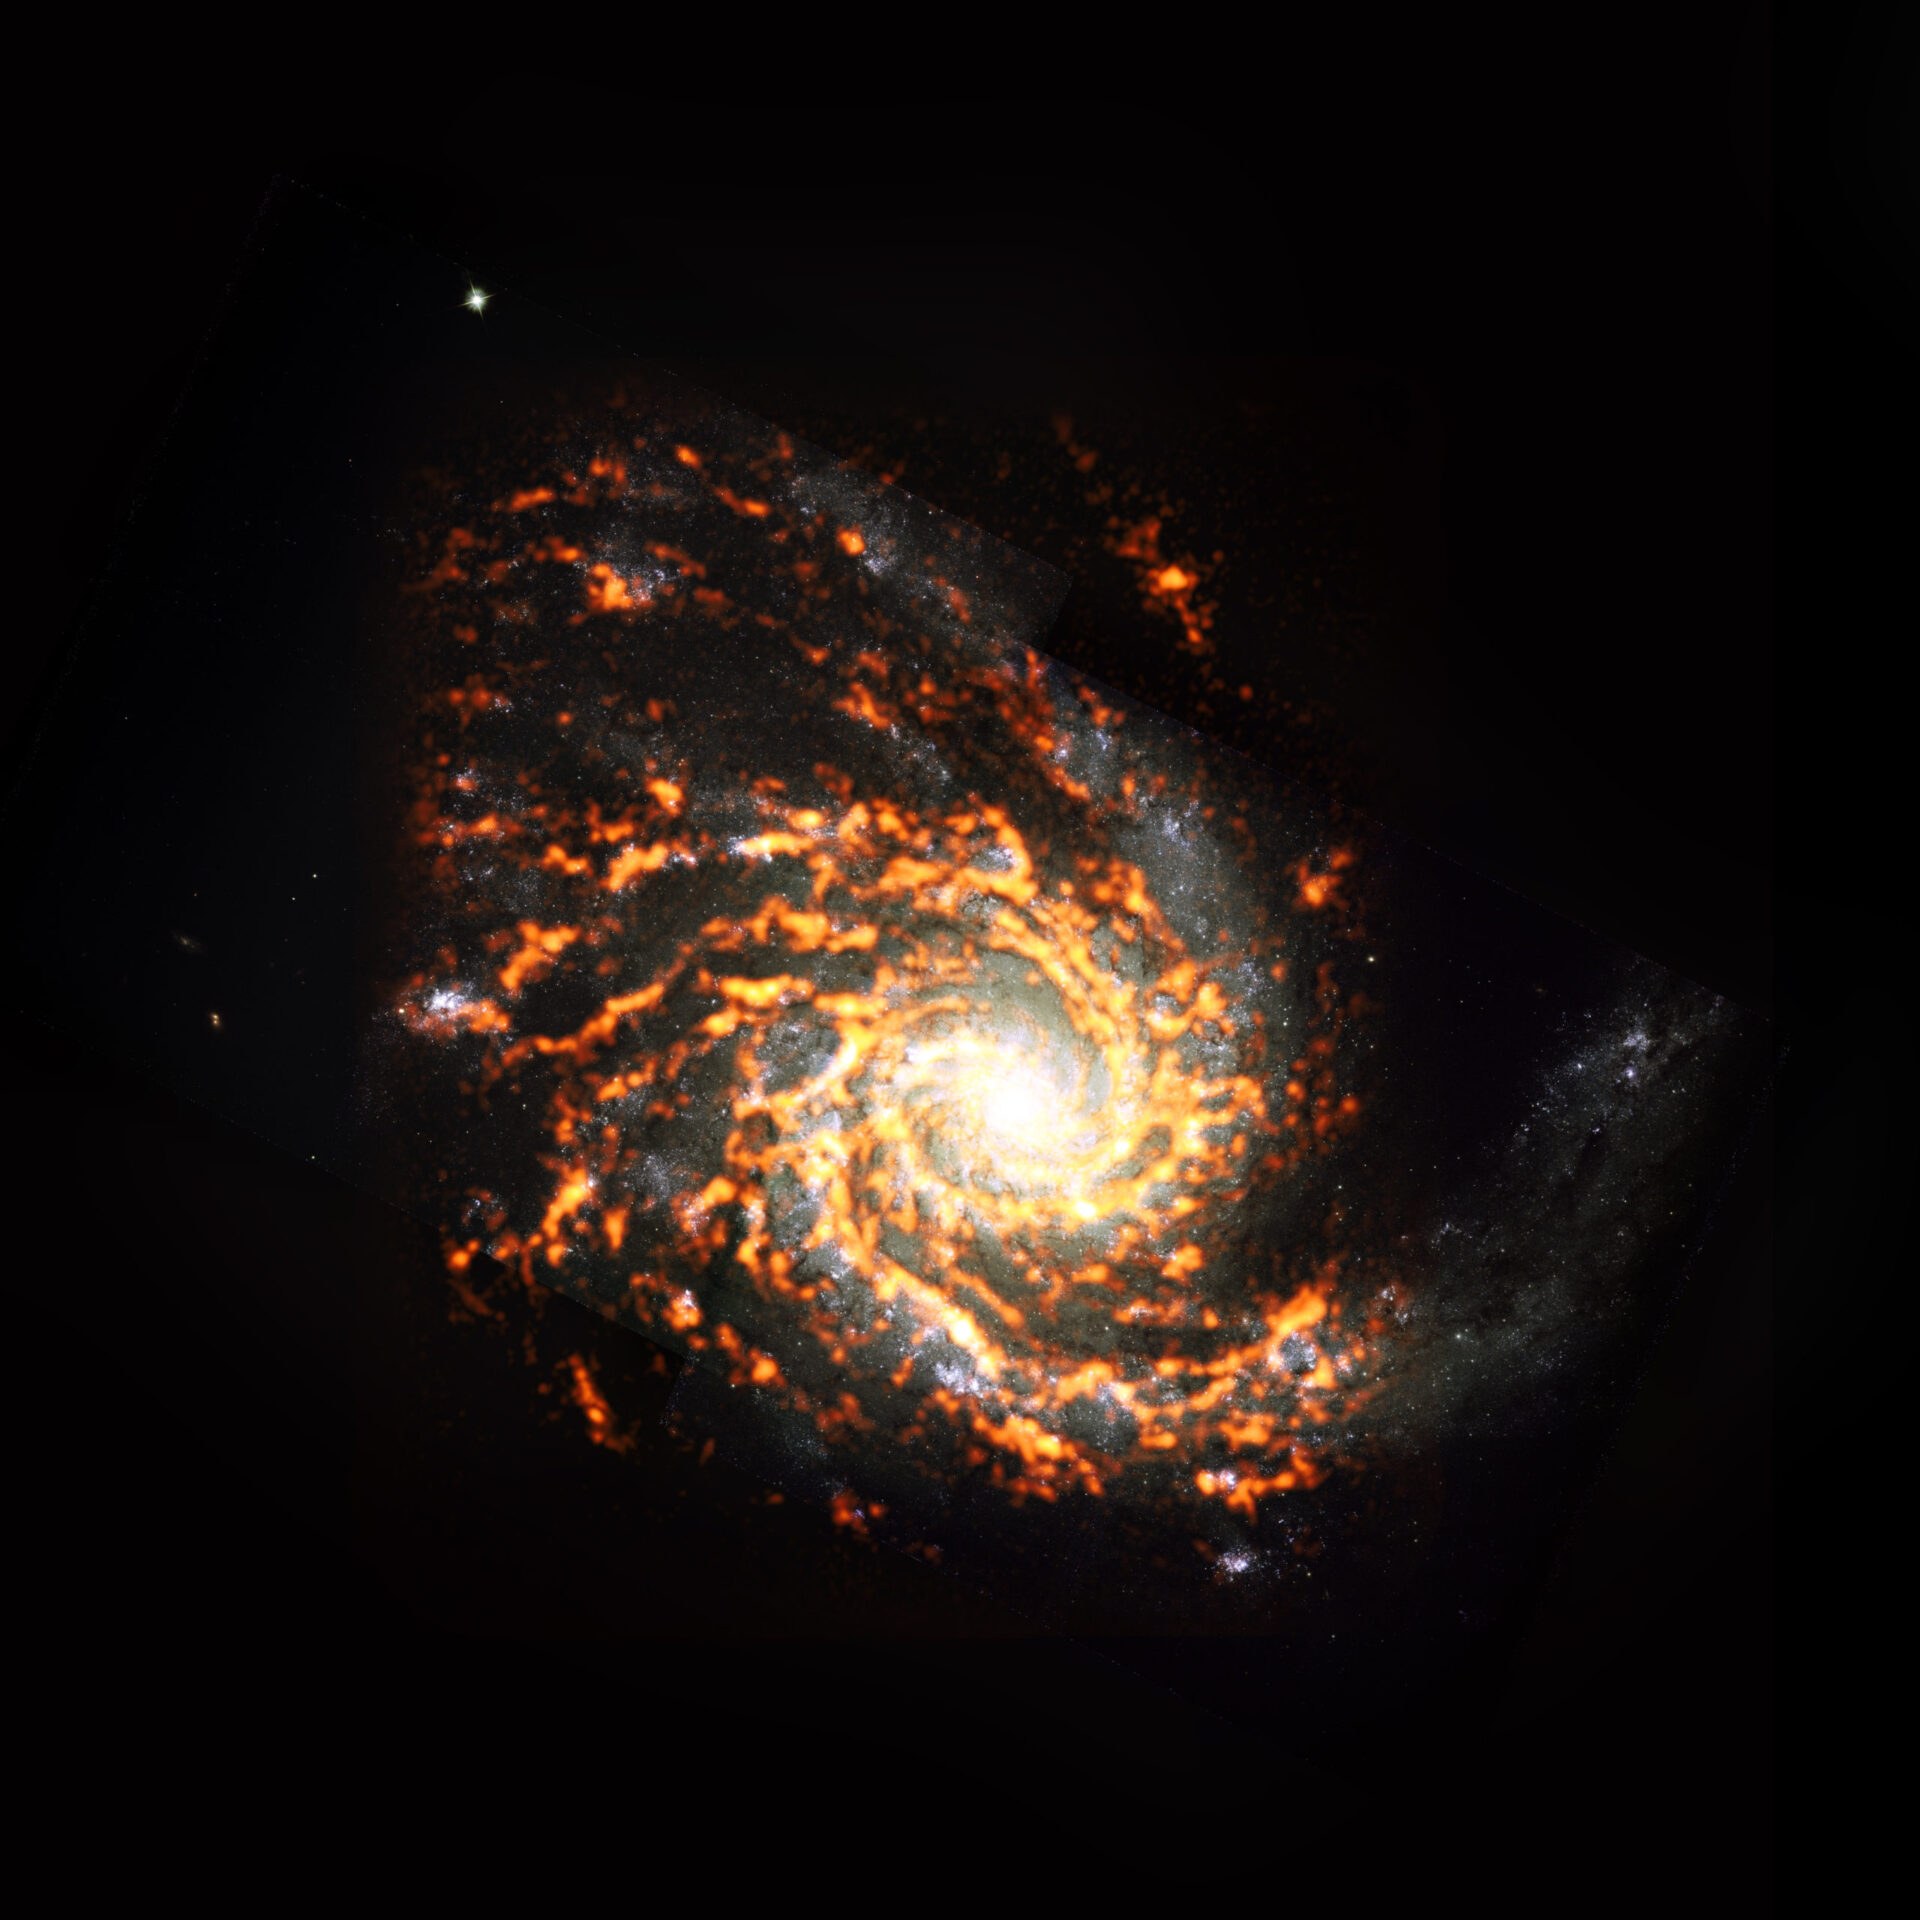 PHANGS_ngc4254w_composite_color